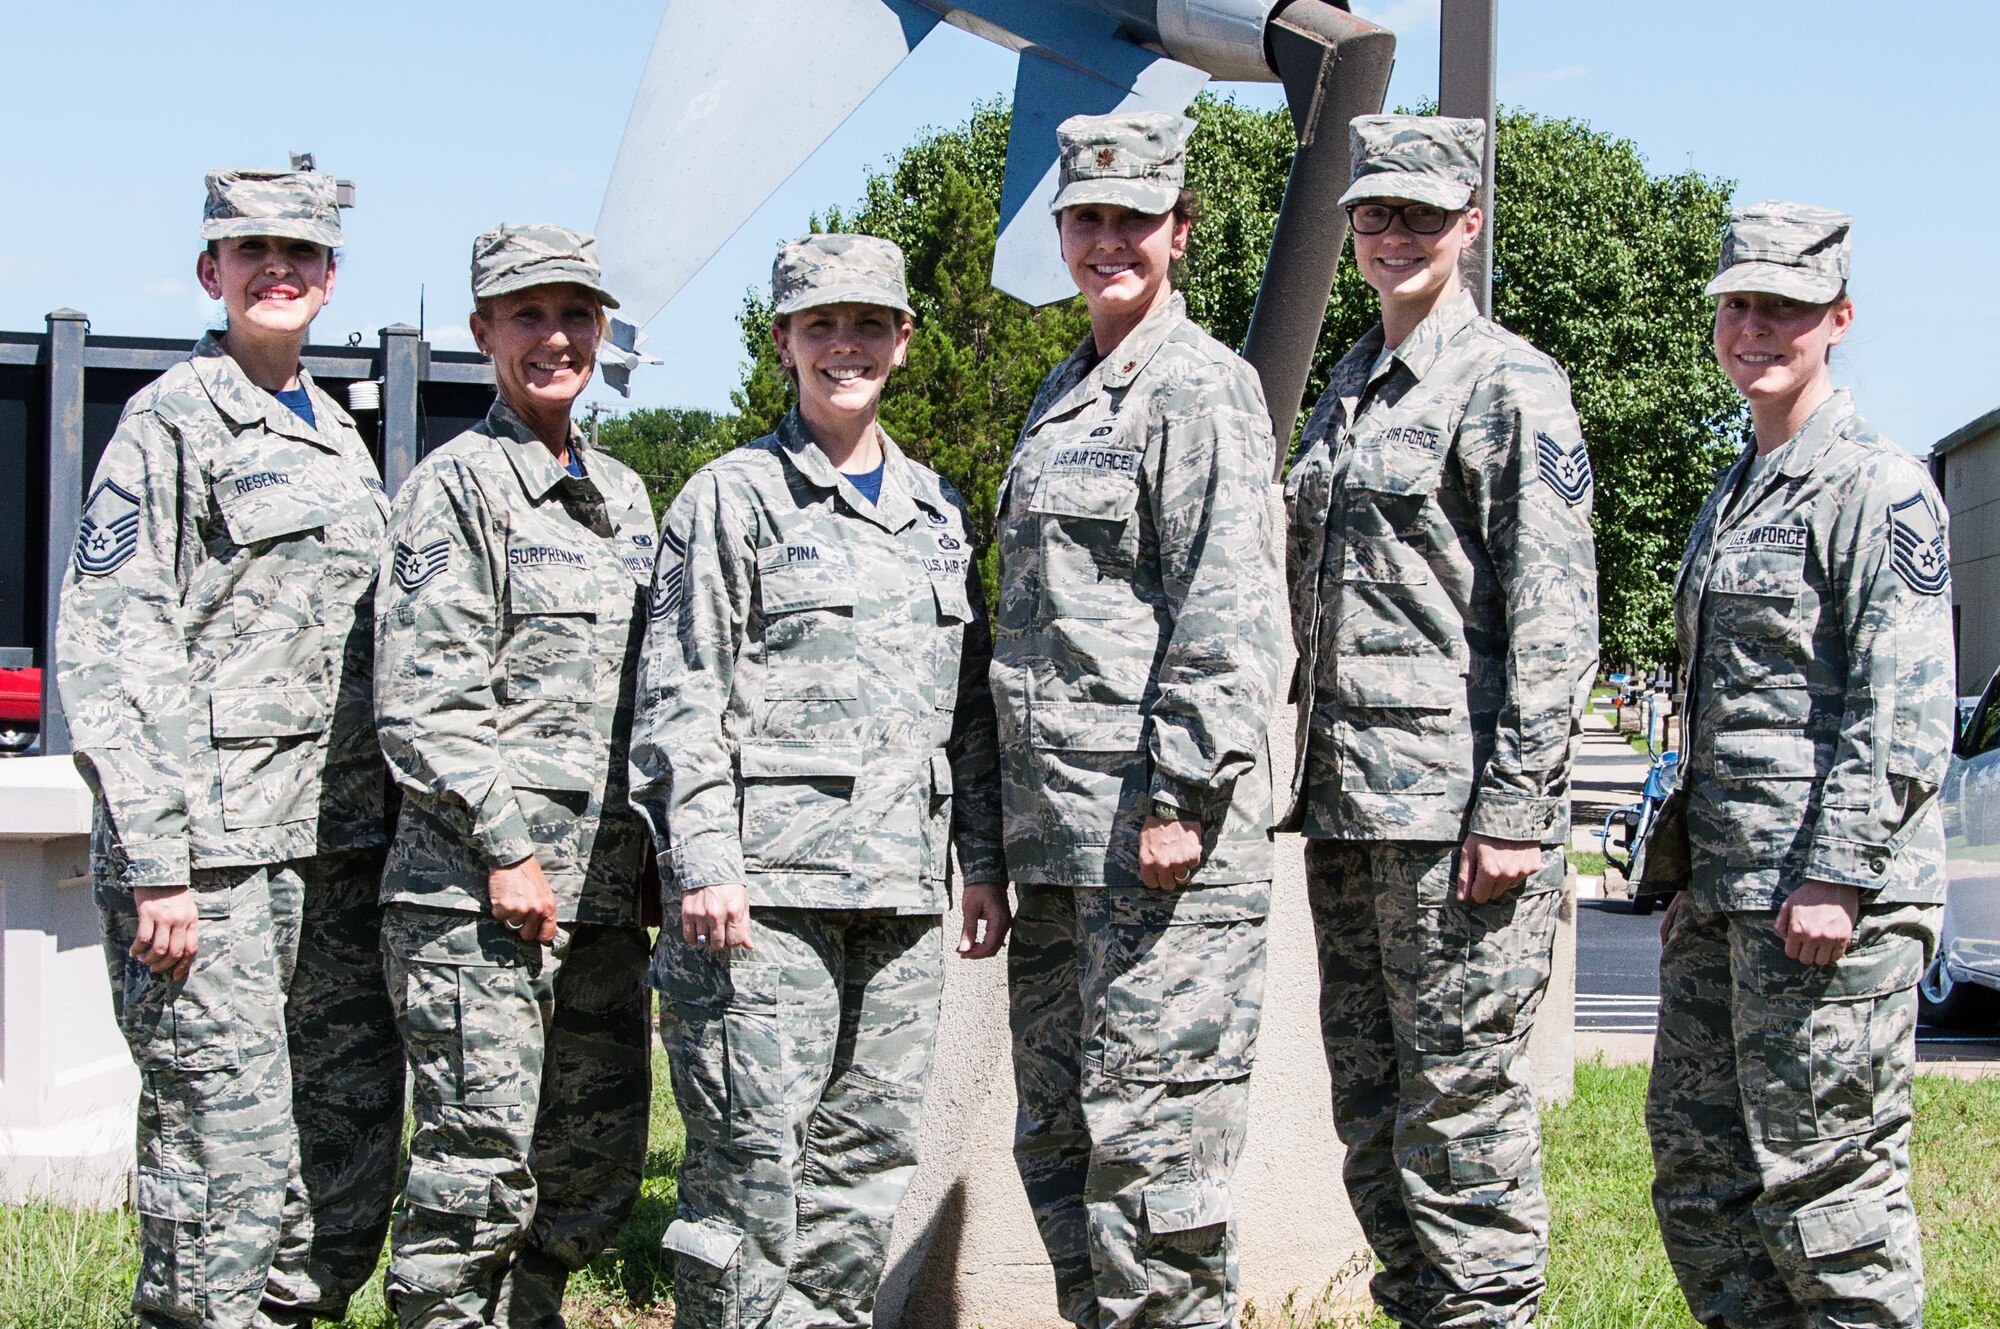 Senior Master Sgt. Lisa Pina (third from left), 301st Force Support Squadron force development superintendent, poses with members from the squadron and her flight, here June 5. Pina, along with her flight, play a vital role in developing and empowering Airmen in the 301st Fighter Wing by helping them connect to resources for degrees, like the Community College of the Air Force (CCAF), along with professional military education, such as on-the-job training or Airman Leadership School. (U.S. Air Force photo by Master Sgt. Joshua Woods)